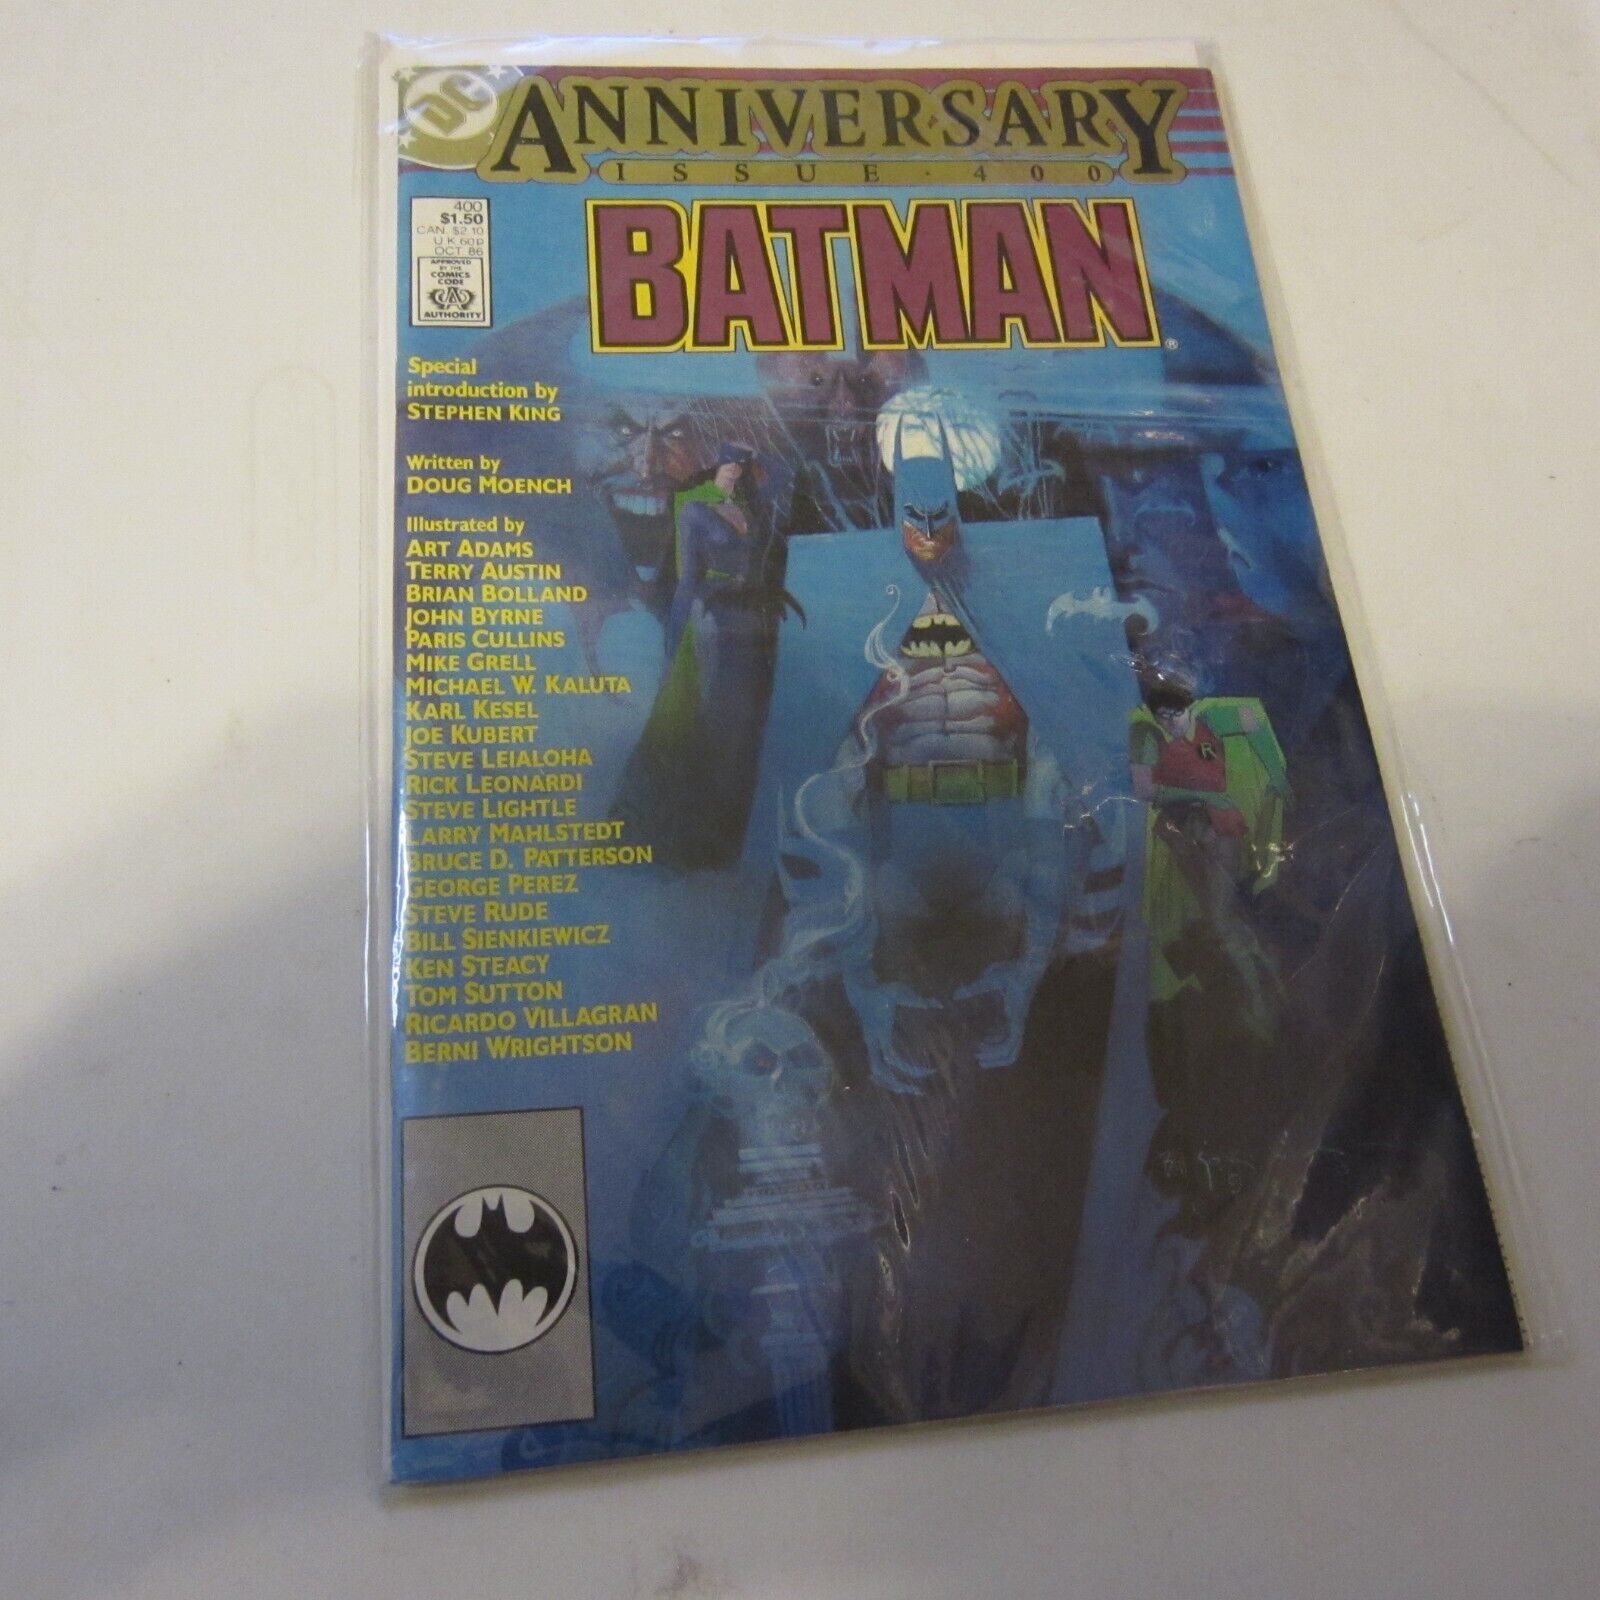 Batman #400 DC Comics Anniversary Issue October 1986 MINT BAGED BOARDED